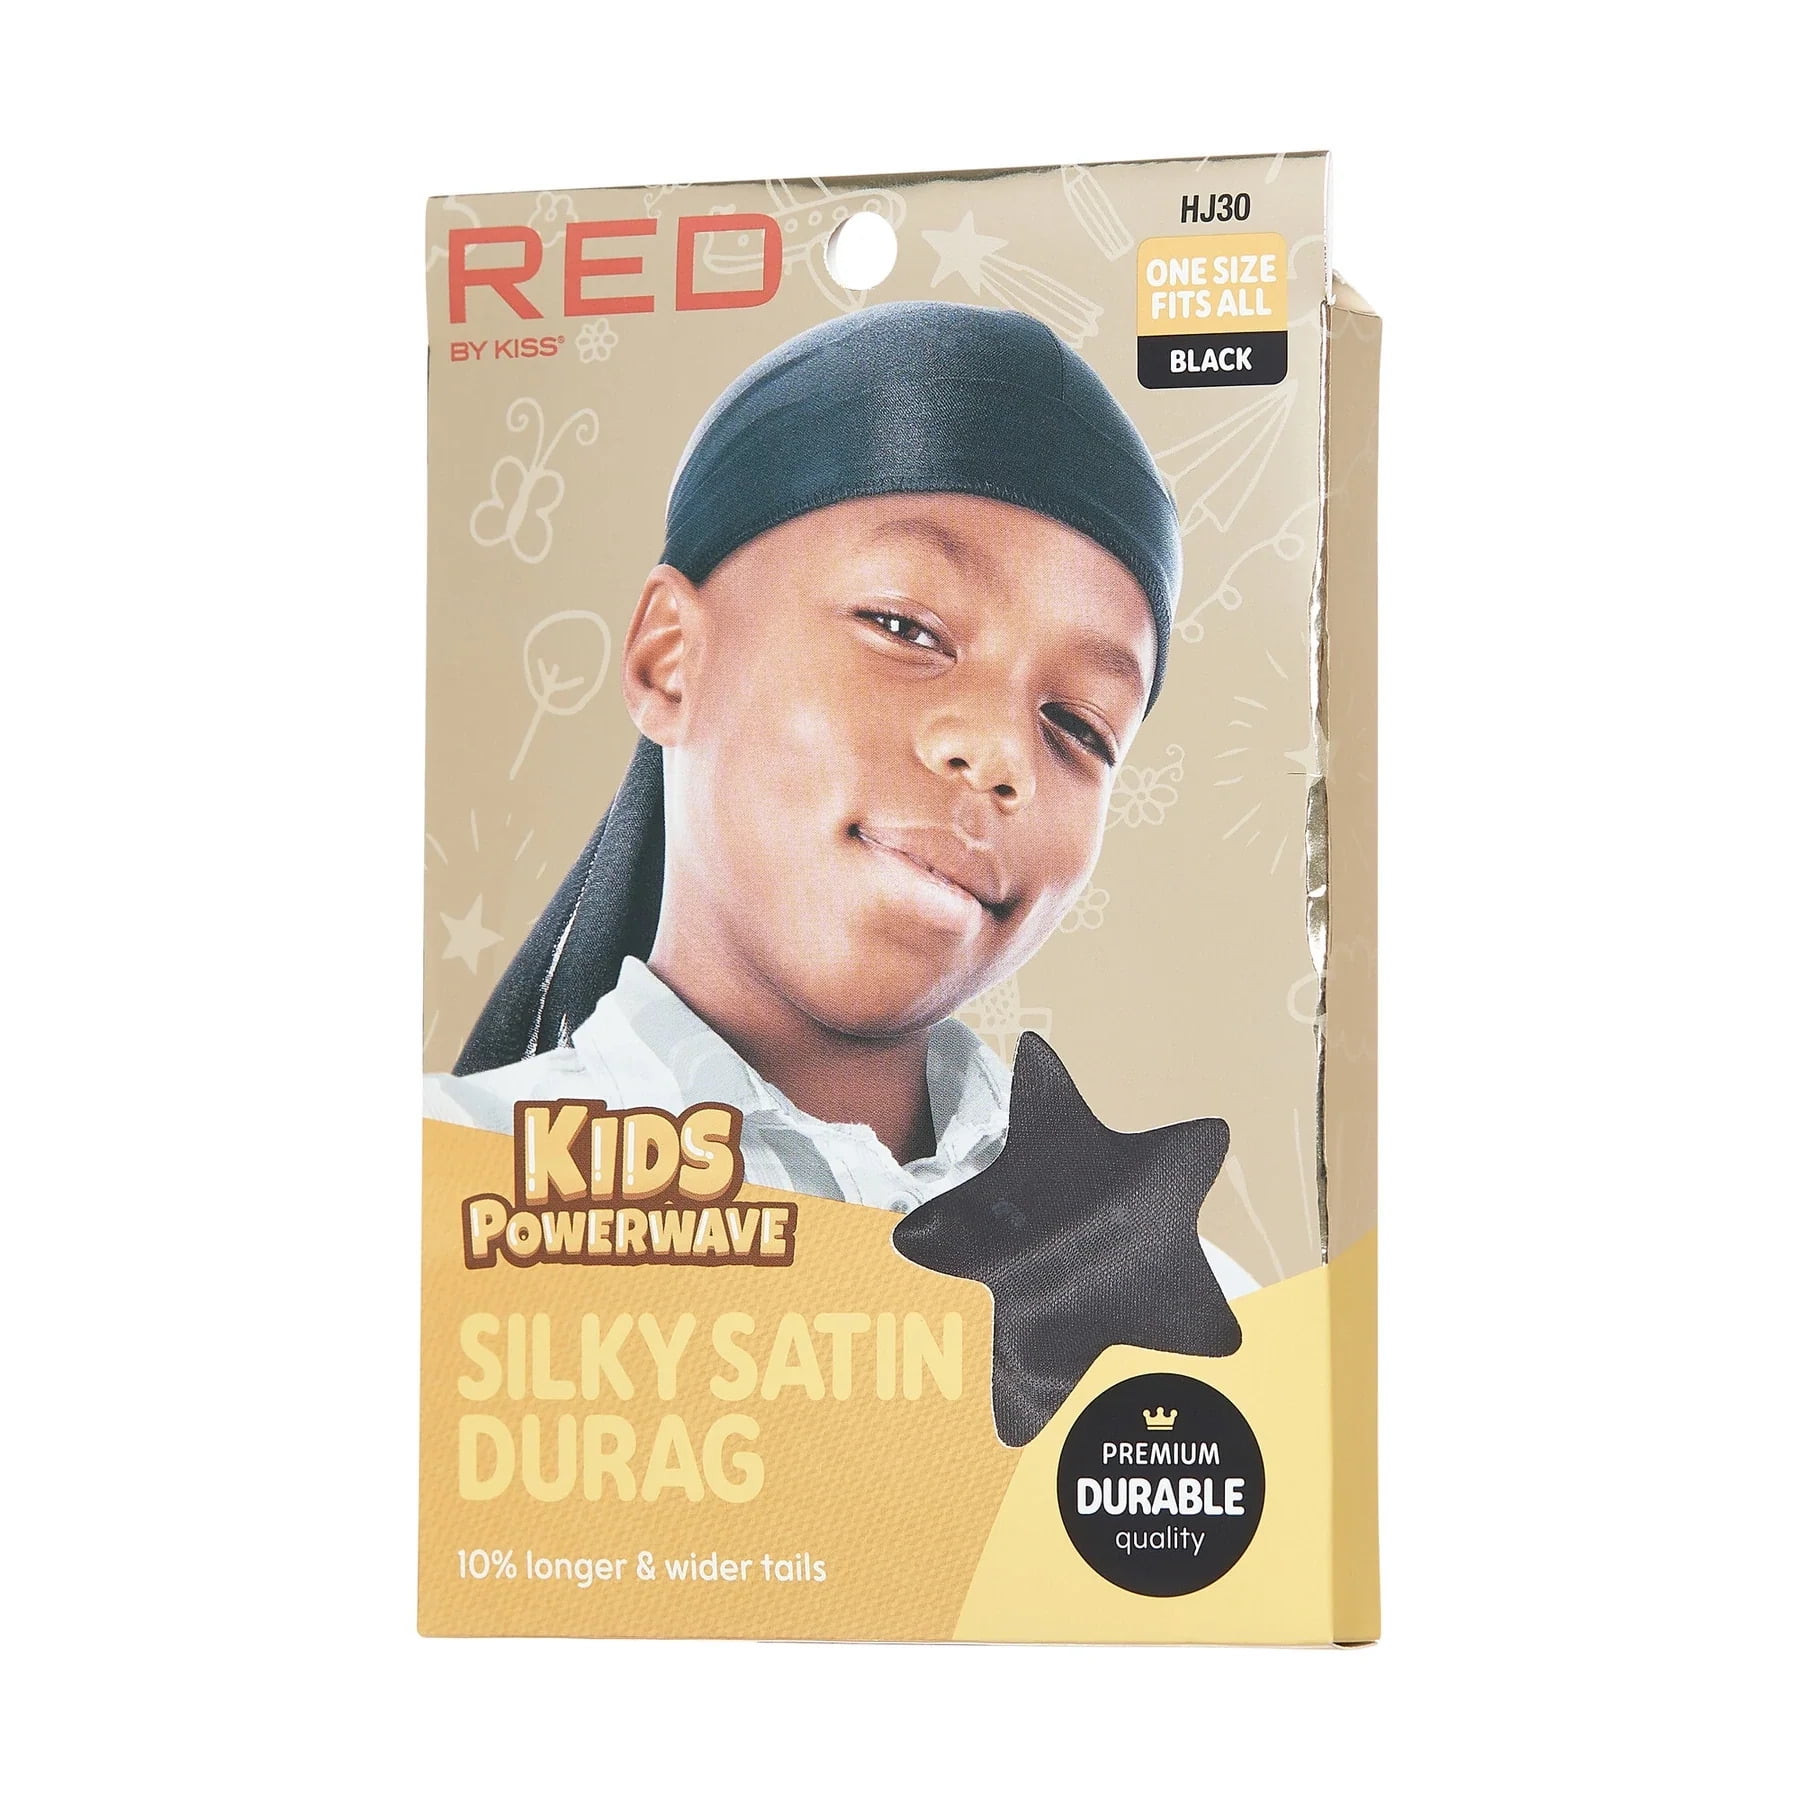 KISS Colors & Care Satin Premium Silky Powerwave Durag, Male/Child,  Camouflage 